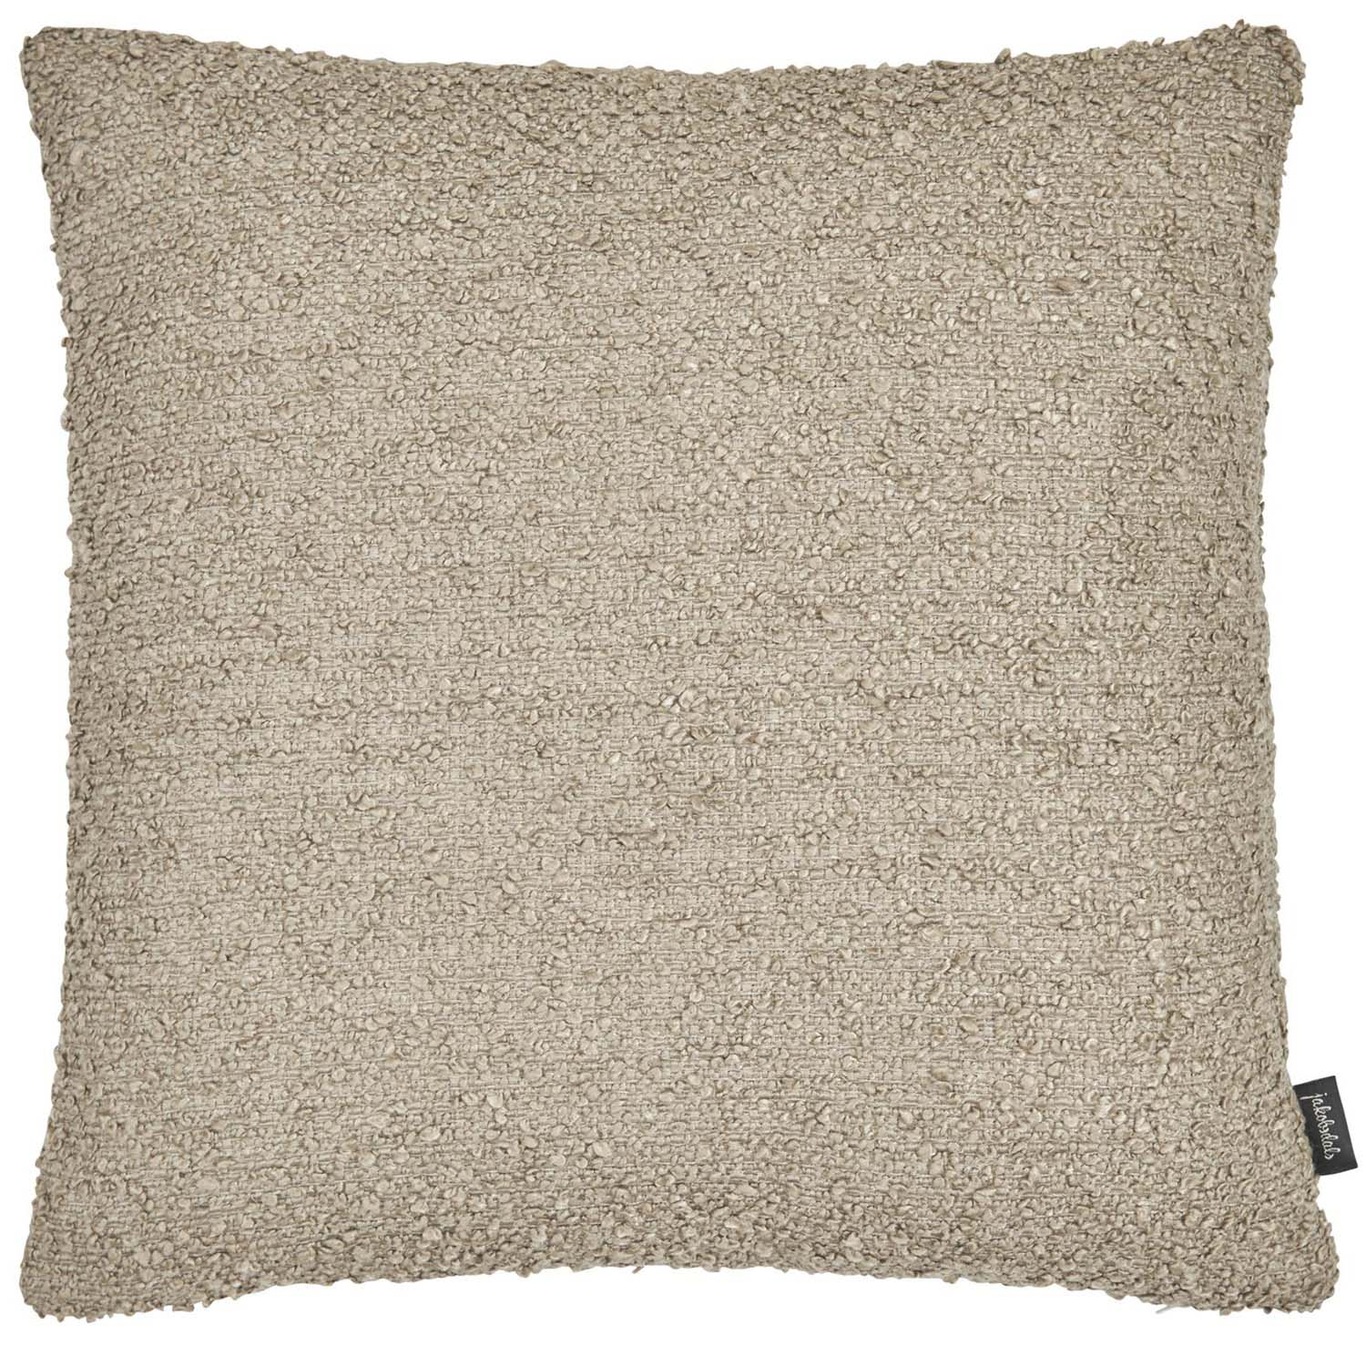 Boucle moment Kuddfodral 50X50 cm, Greige